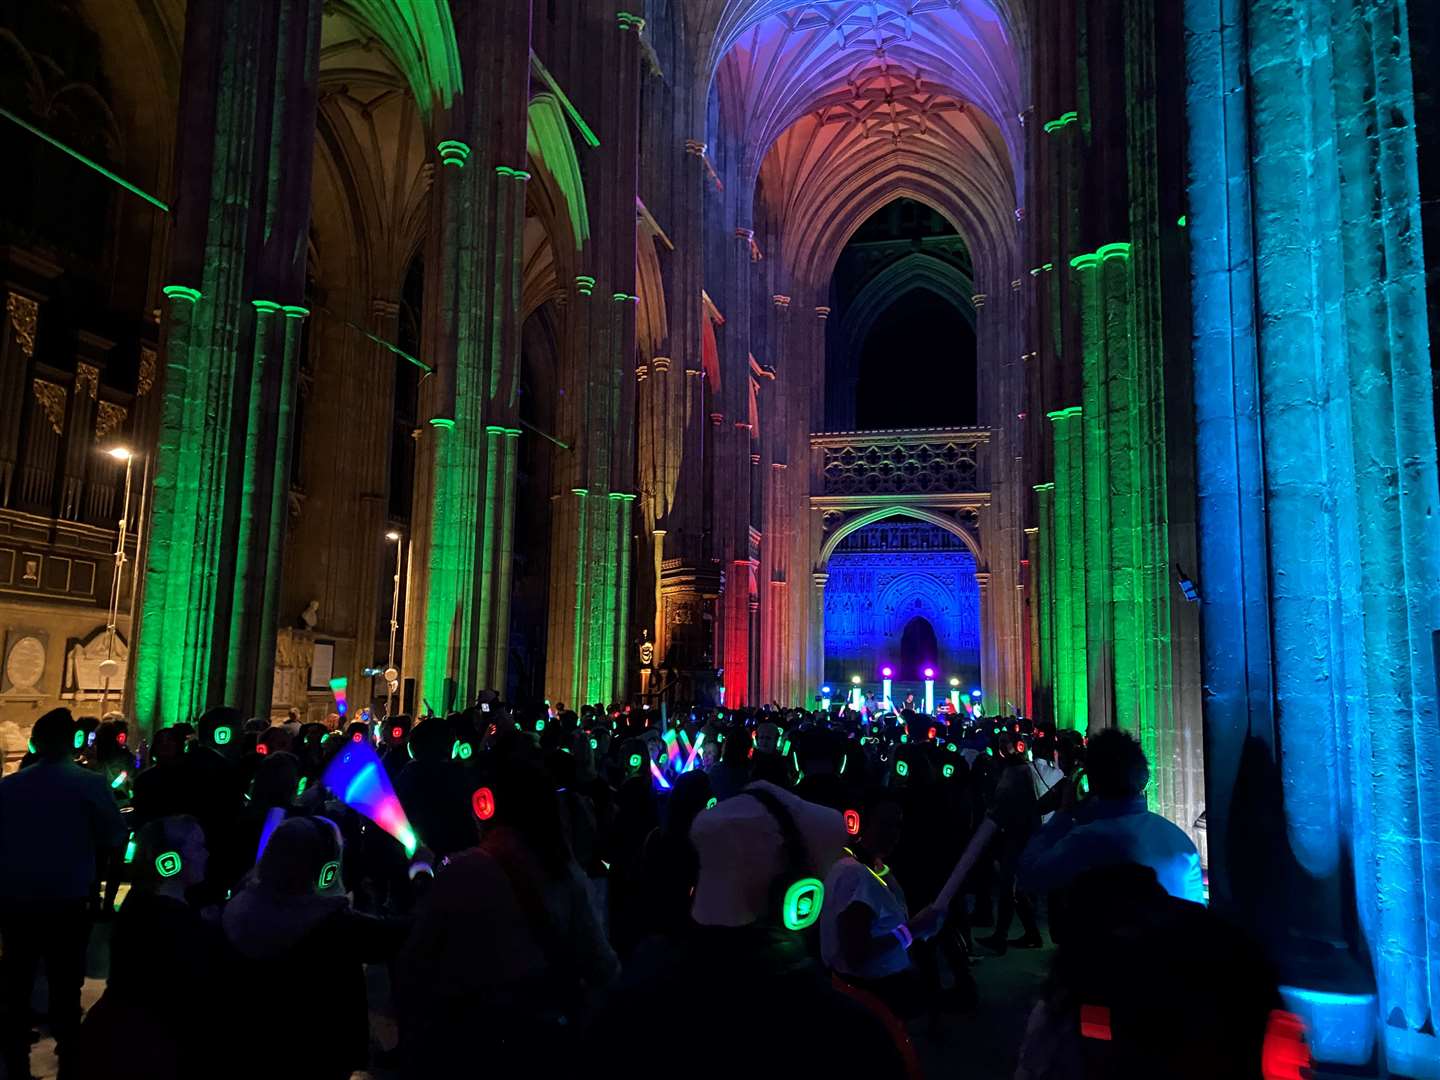 The crowd was lively at the Canterbury Cathedral silent disco